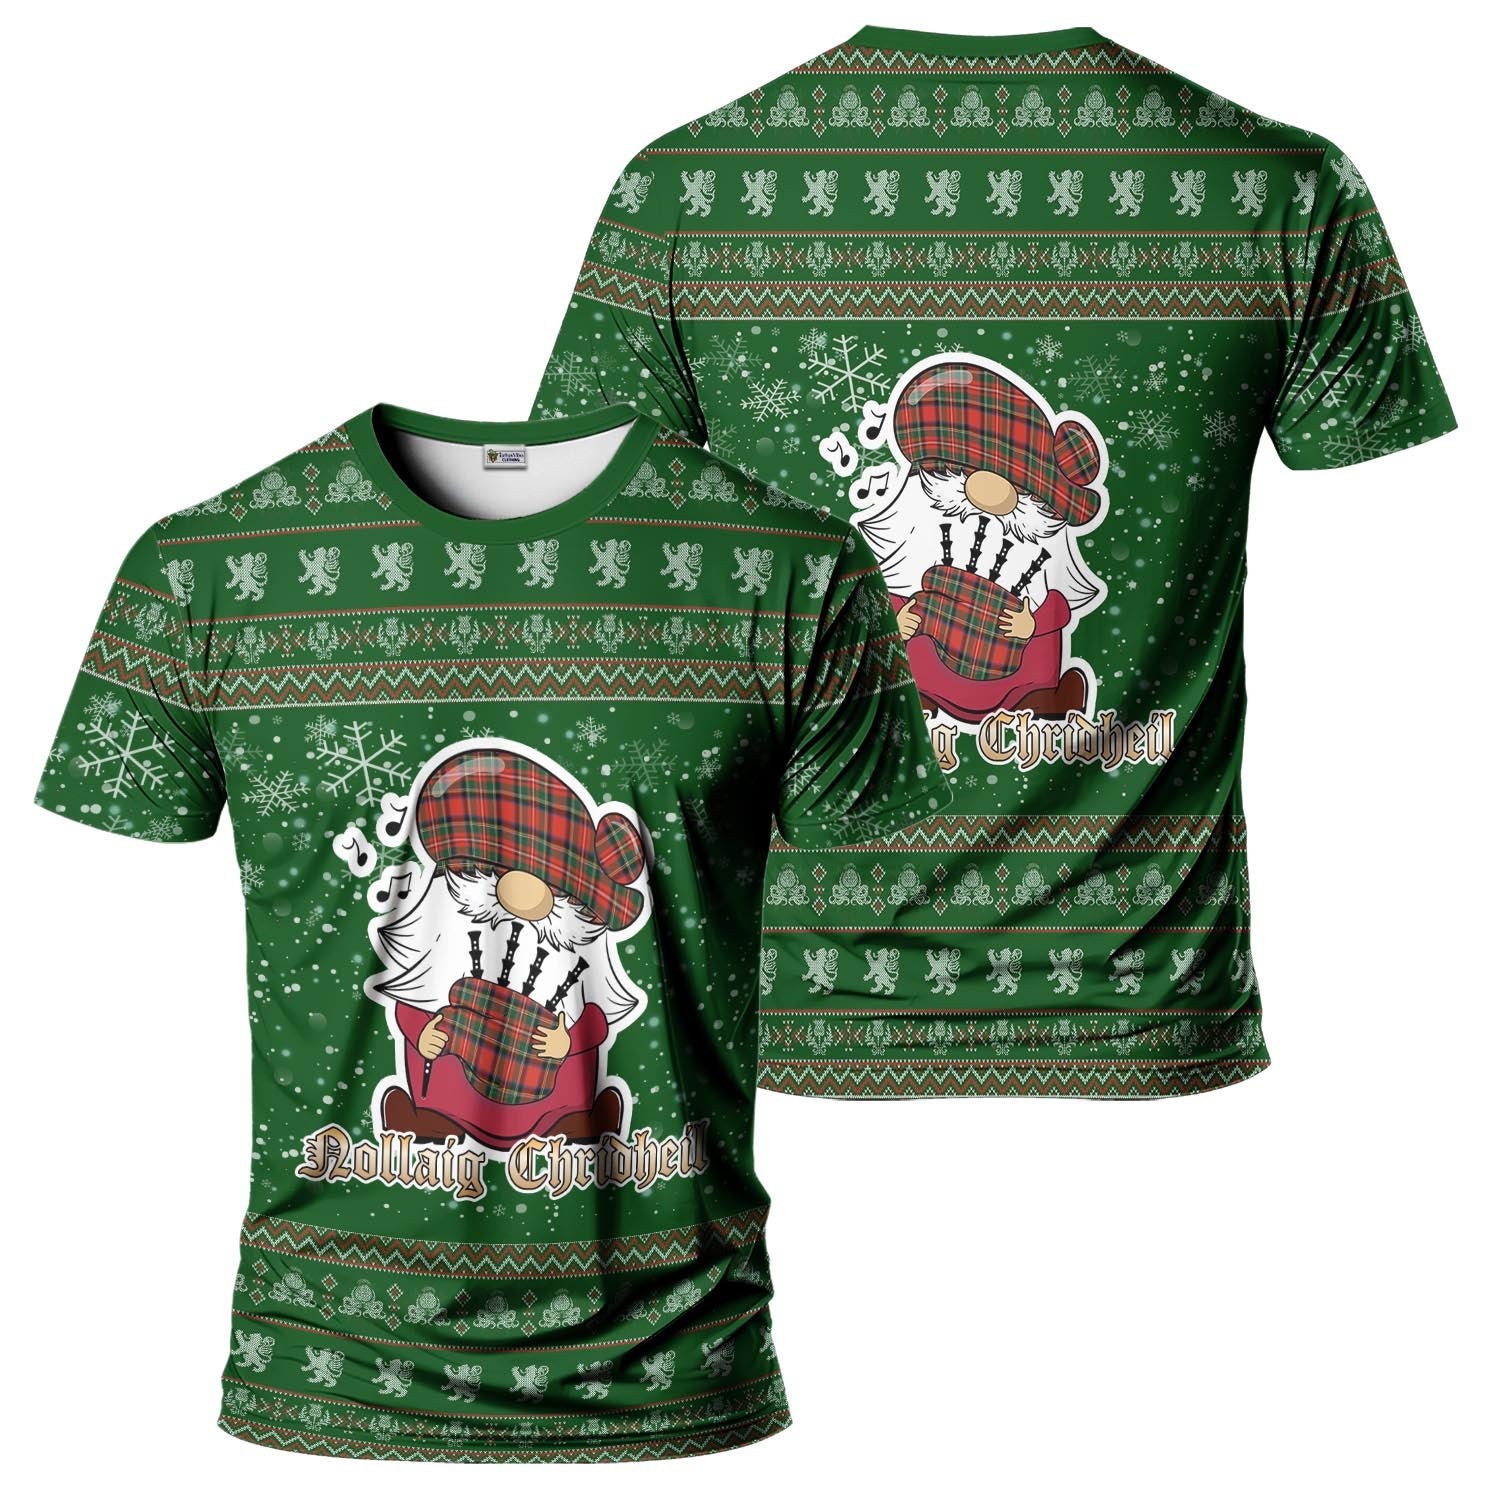 Lyle Clan Christmas Family T-Shirt with Funny Gnome Playing Bagpipes Men's Shirt Green - Tartanvibesclothing